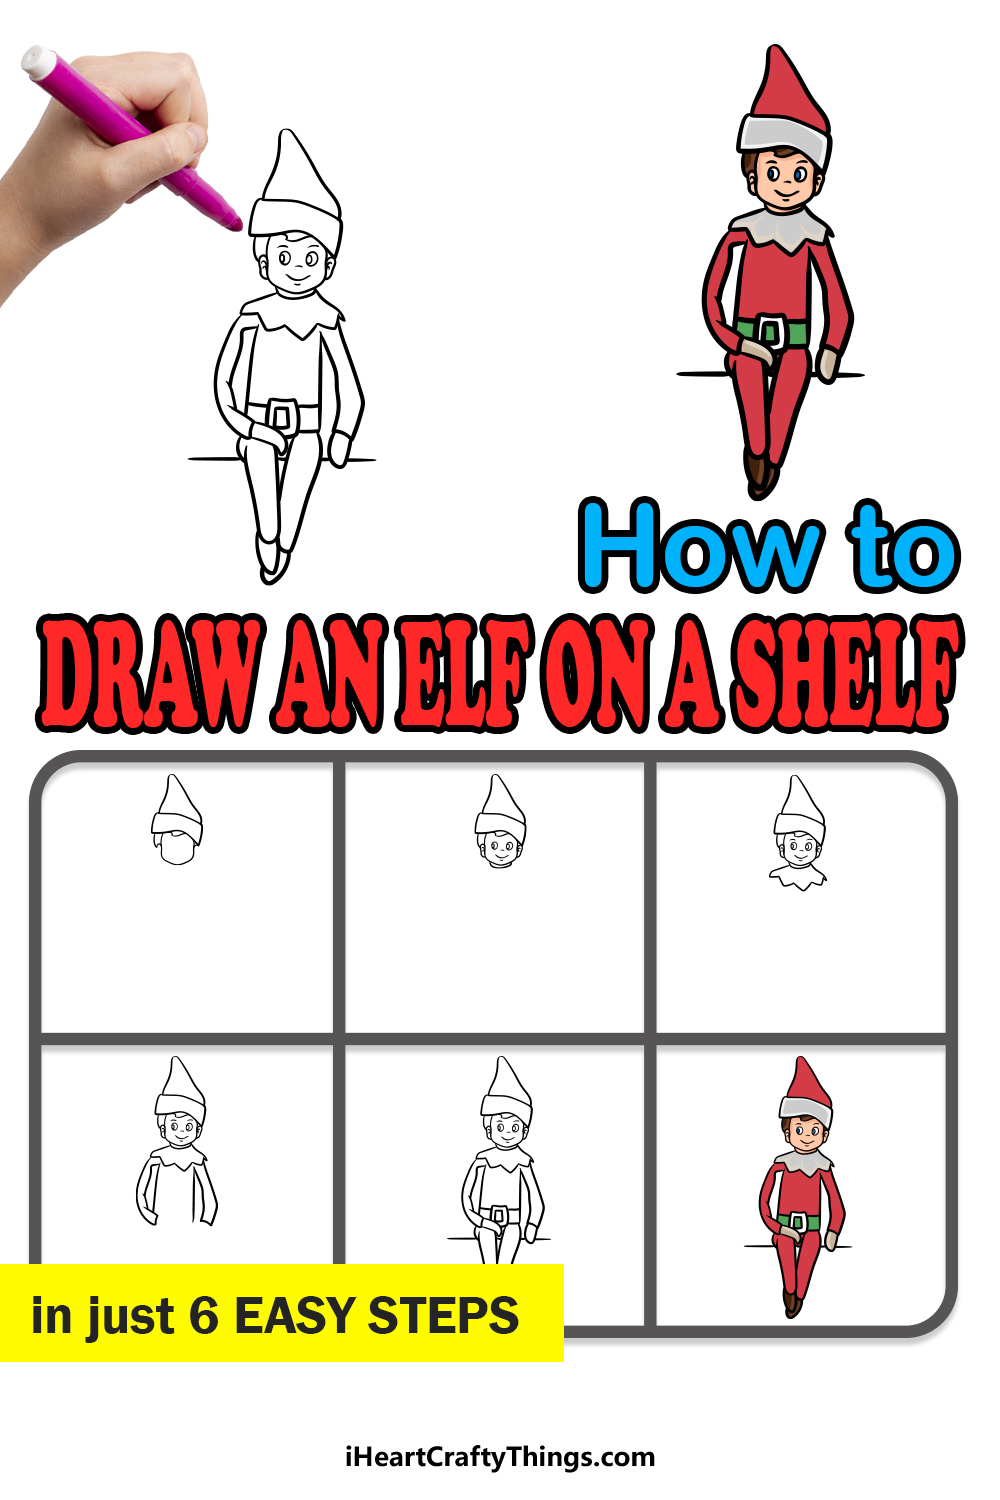 How to draw an elf on a shelf in 6 easy steps